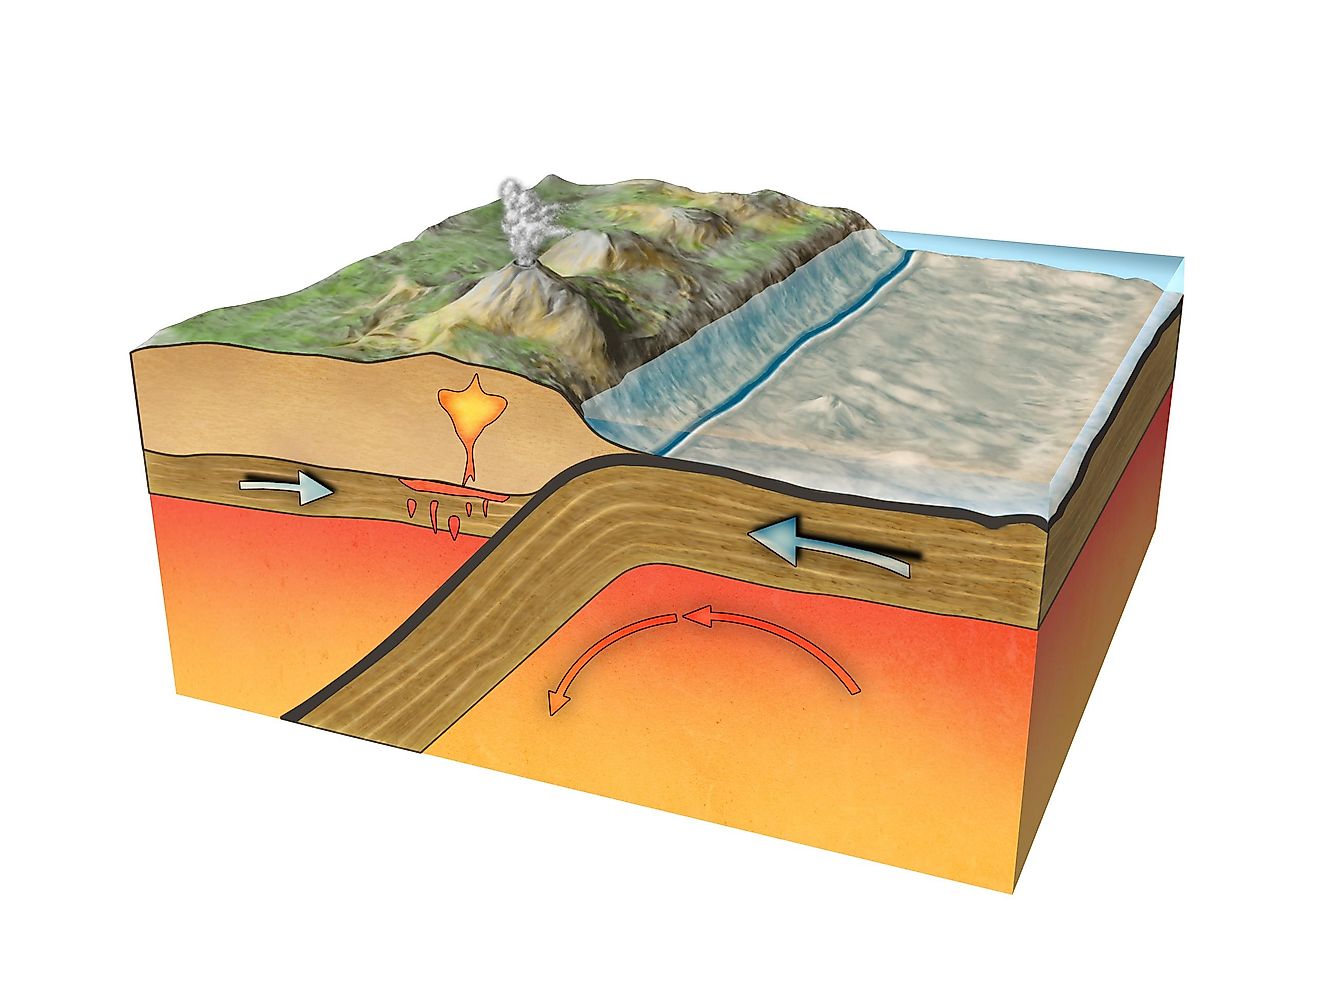 Convergent plate boundary created by two continental plates that slide towards each other.